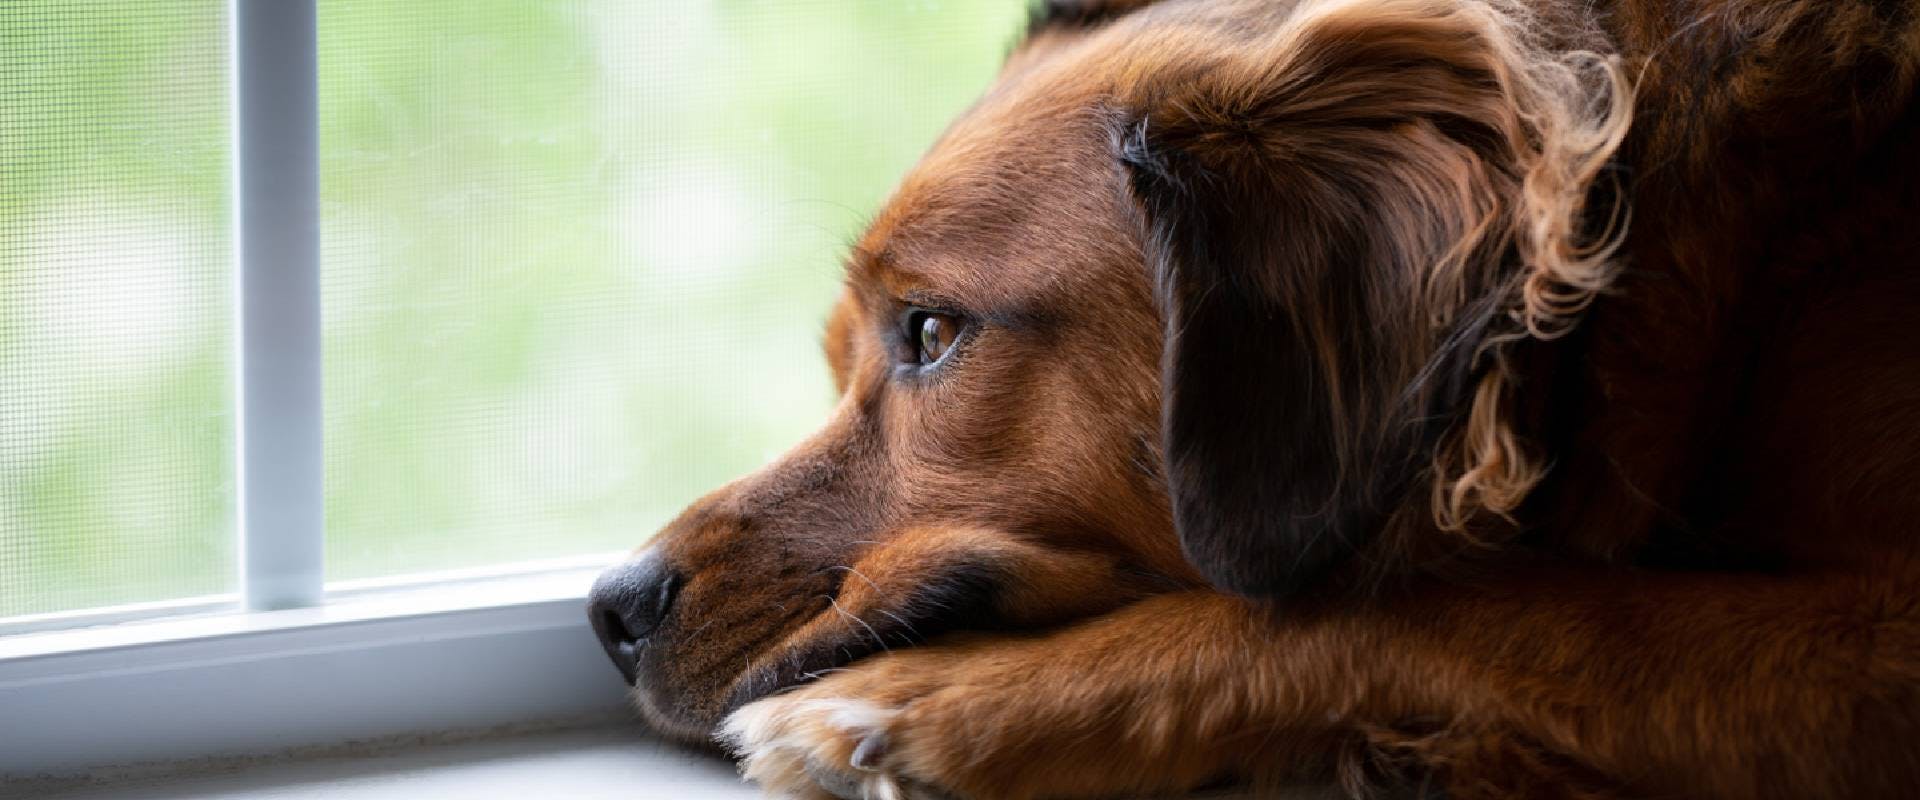 Anxious dog looking out of the window